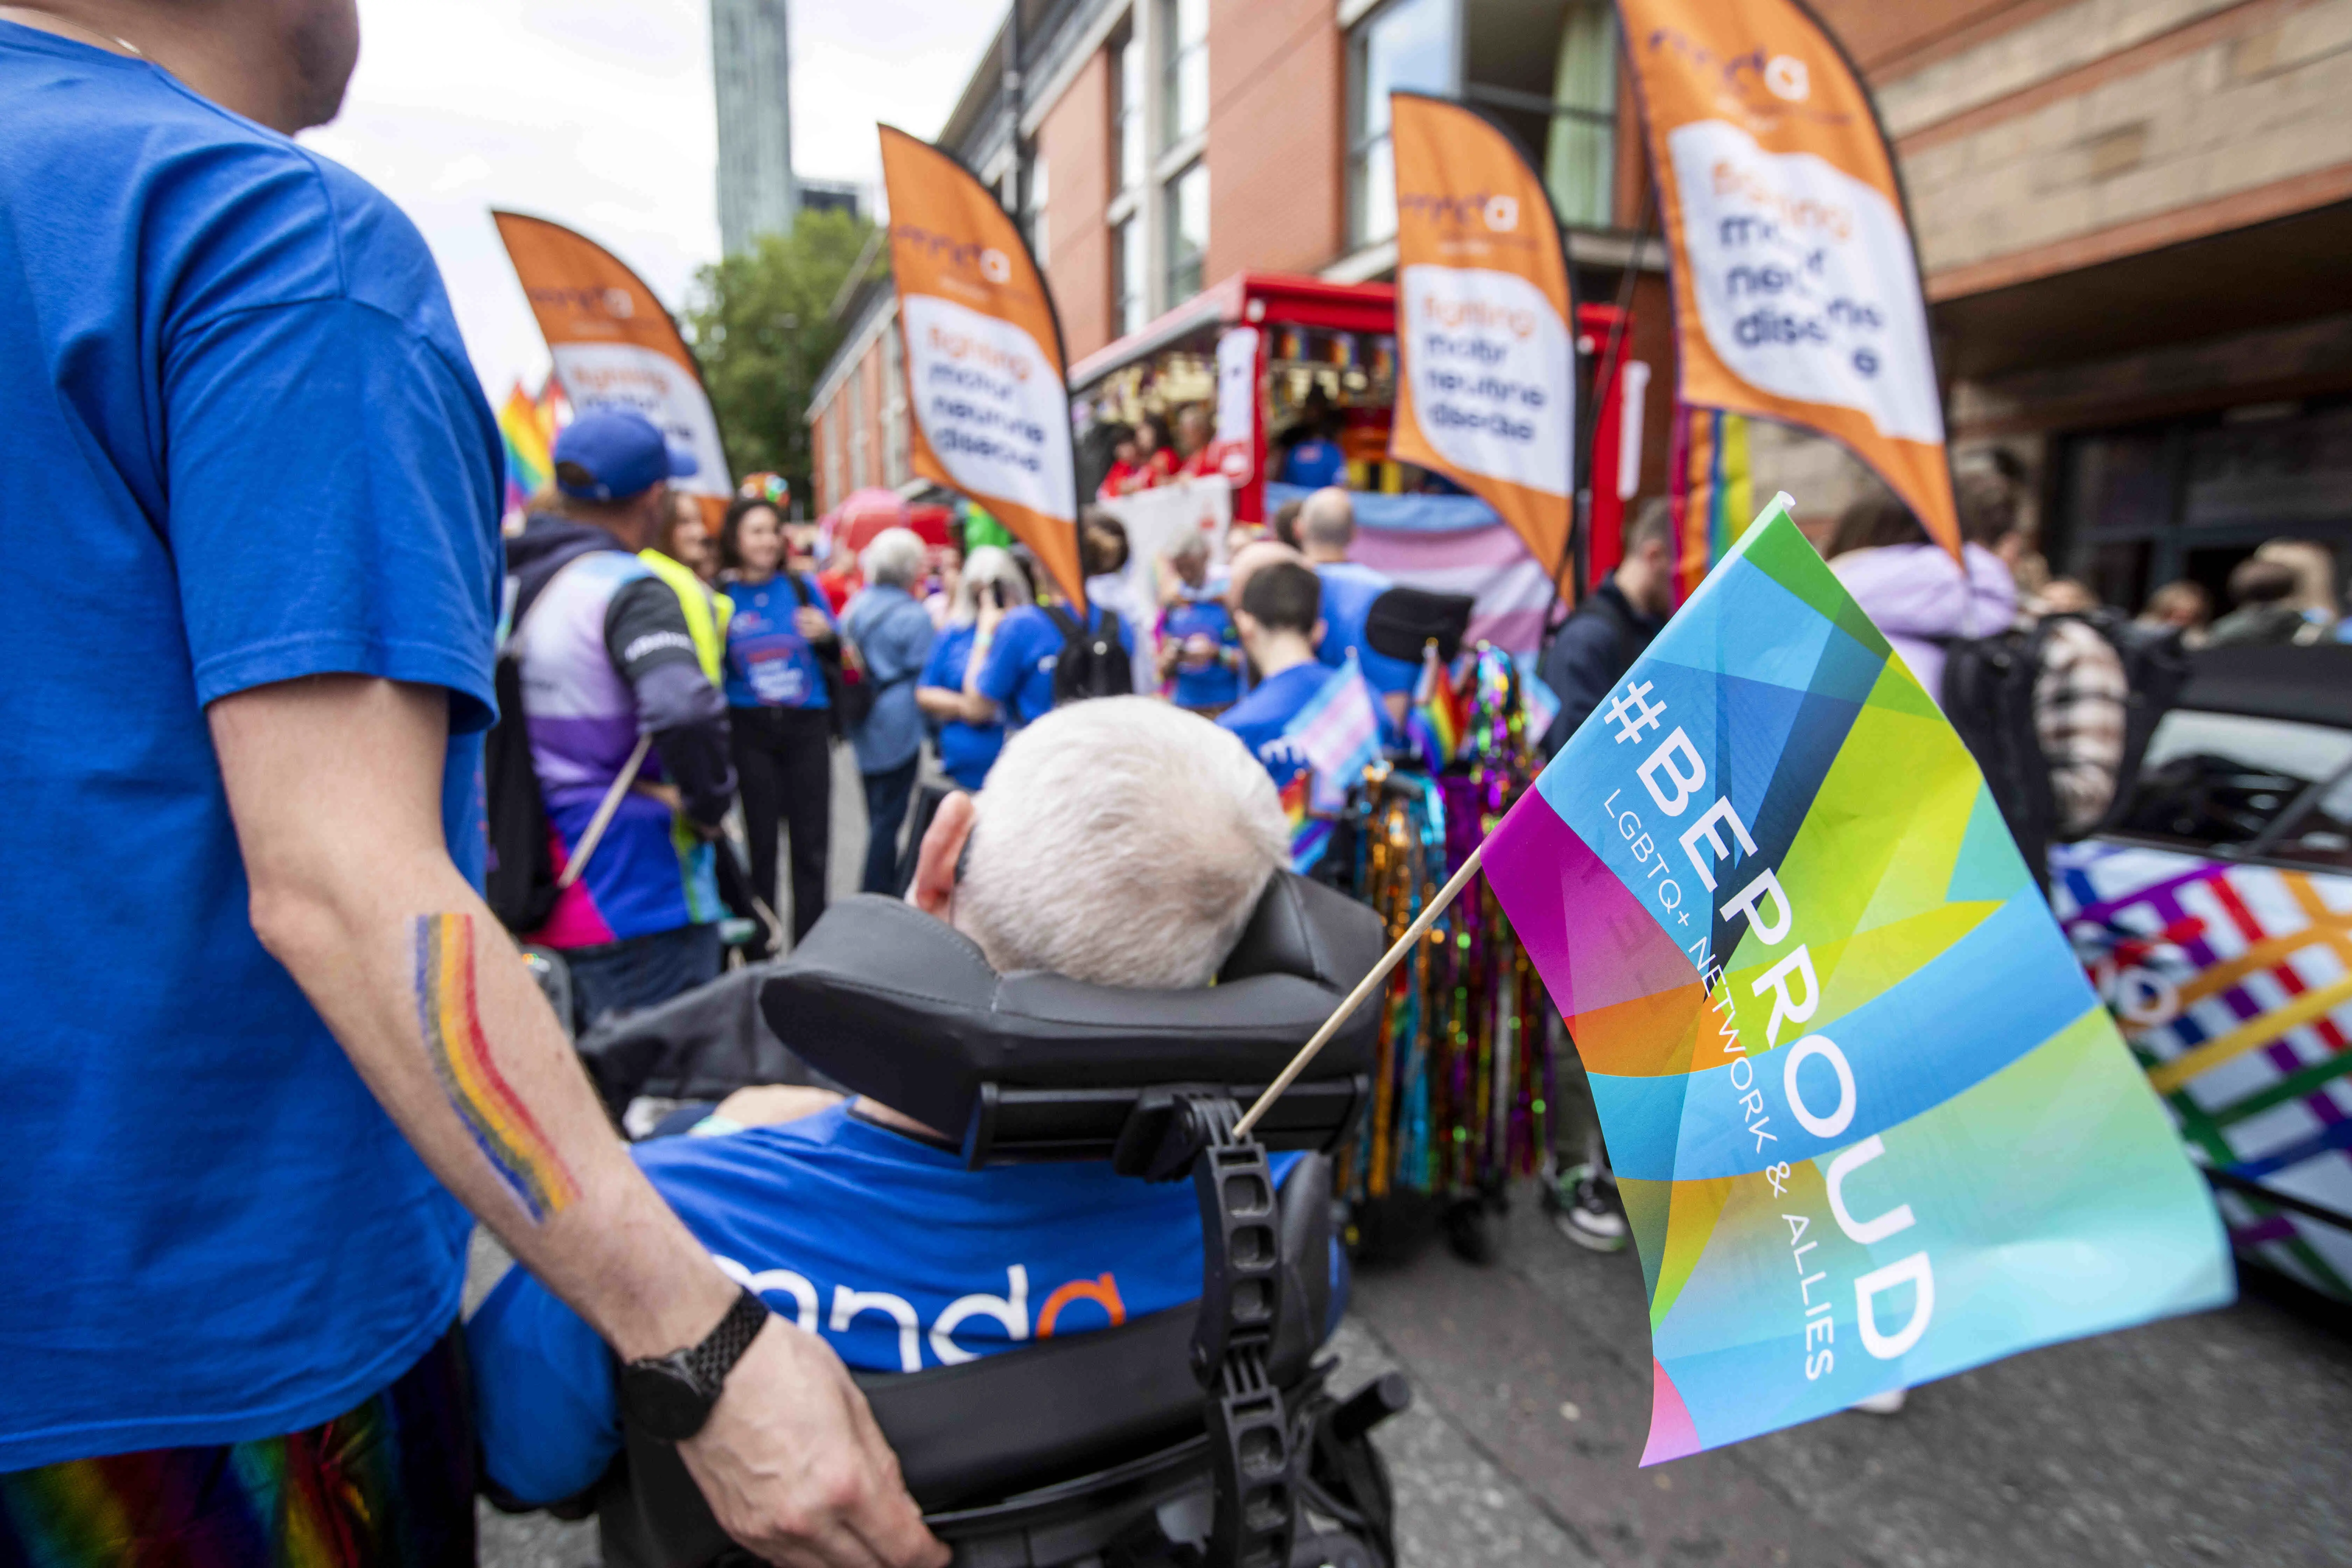 Person living with MND in a mobility scooter looks on at a crowd wearing MND Association blue shirts at Manchester Pride. Association banners are visible.